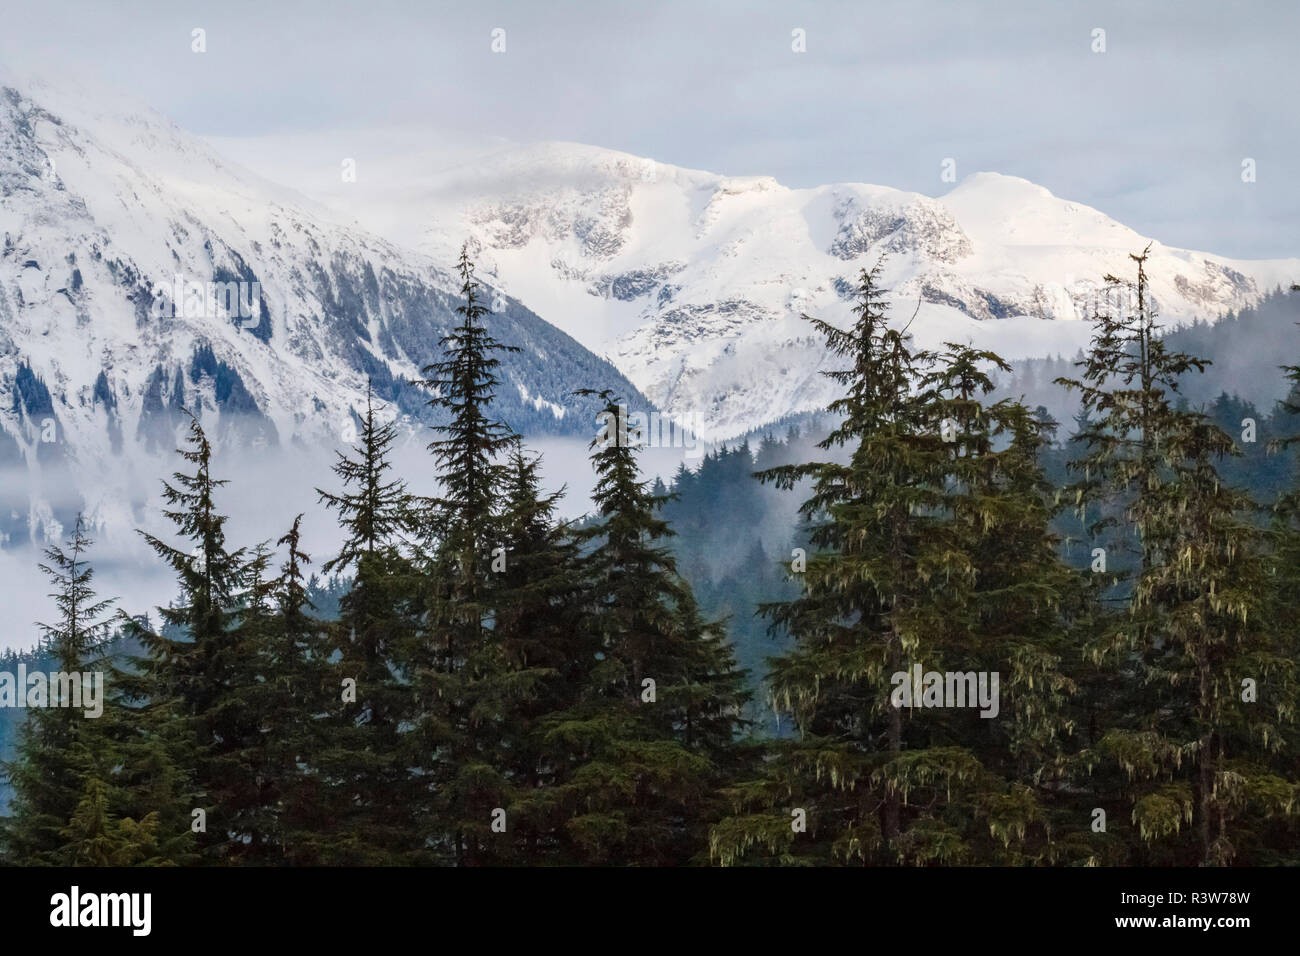 USA, Alaska. Fog and new snow in the mountains and trees near Juneau. Stock Photo